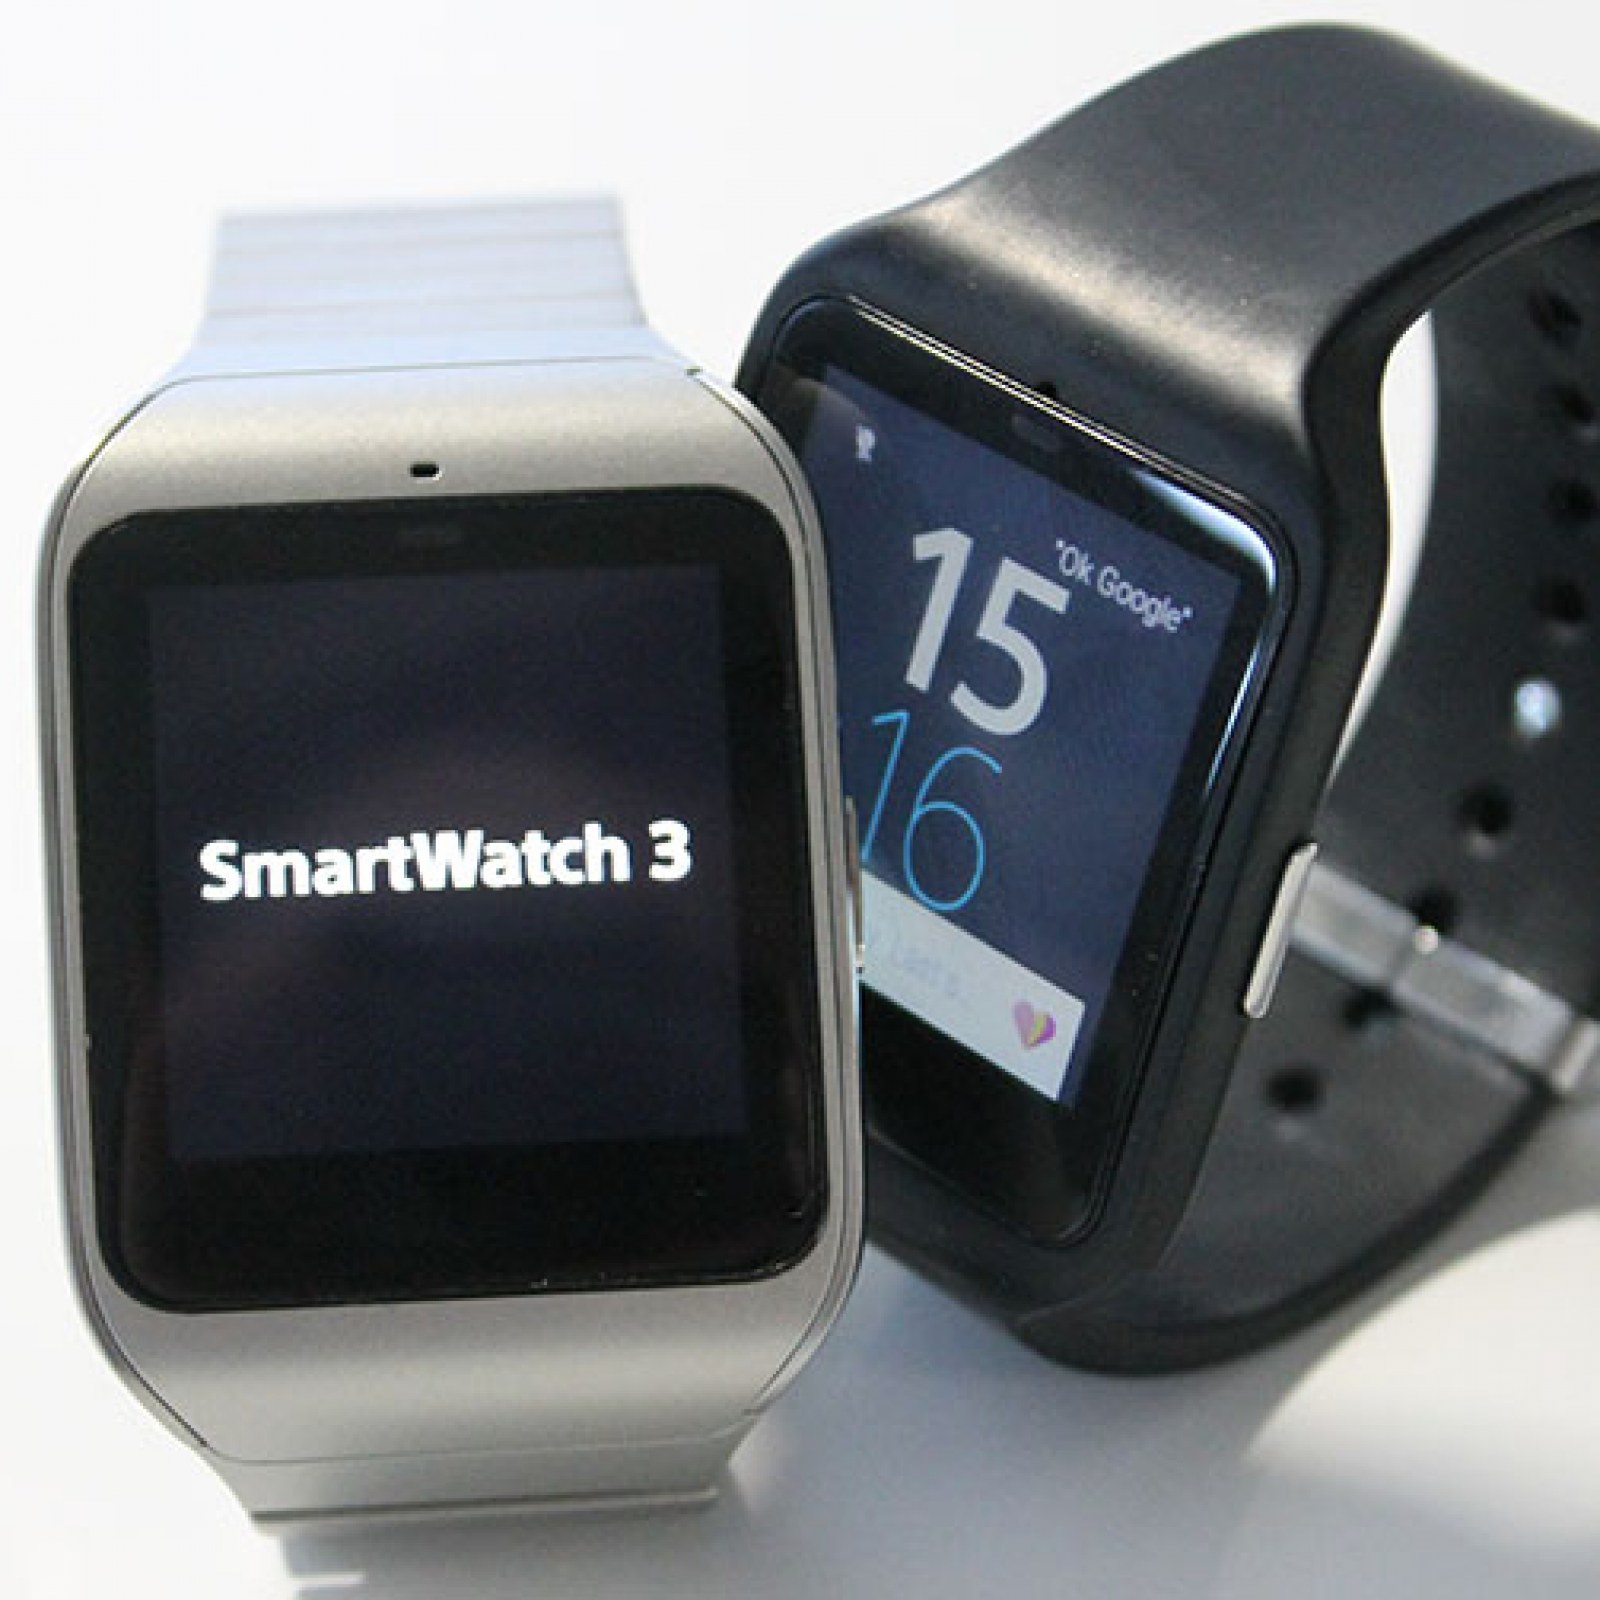 cheek laundry chance Sony SmartWatch 3 review - the best value smartwatch on the market